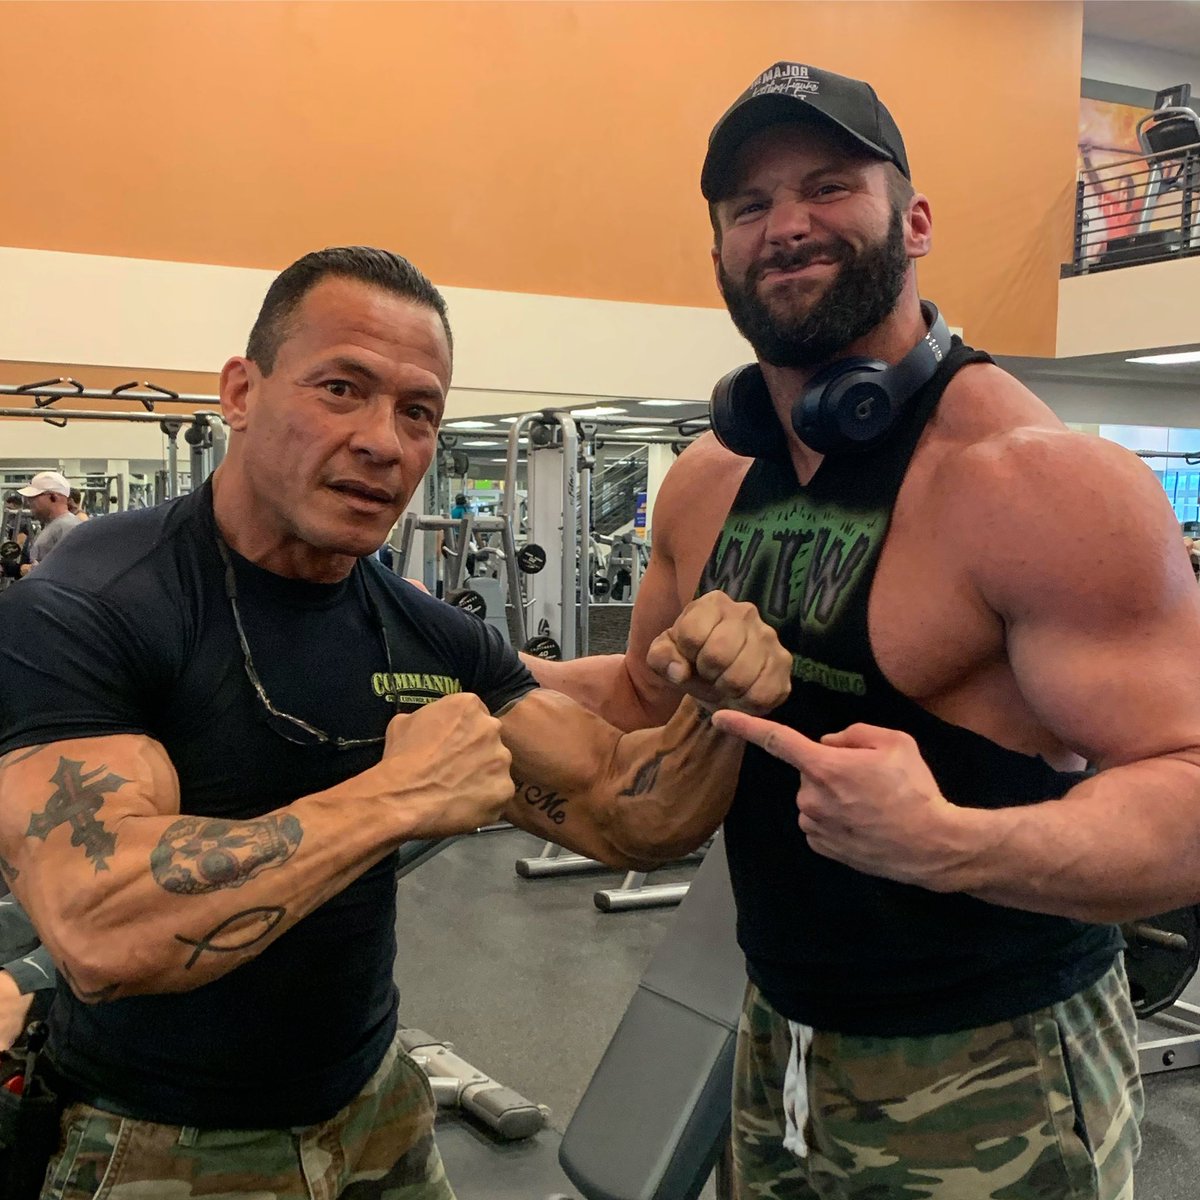 Ran into Kid Romeo from WCW at the gym today...he’s #AlwayzReady too!